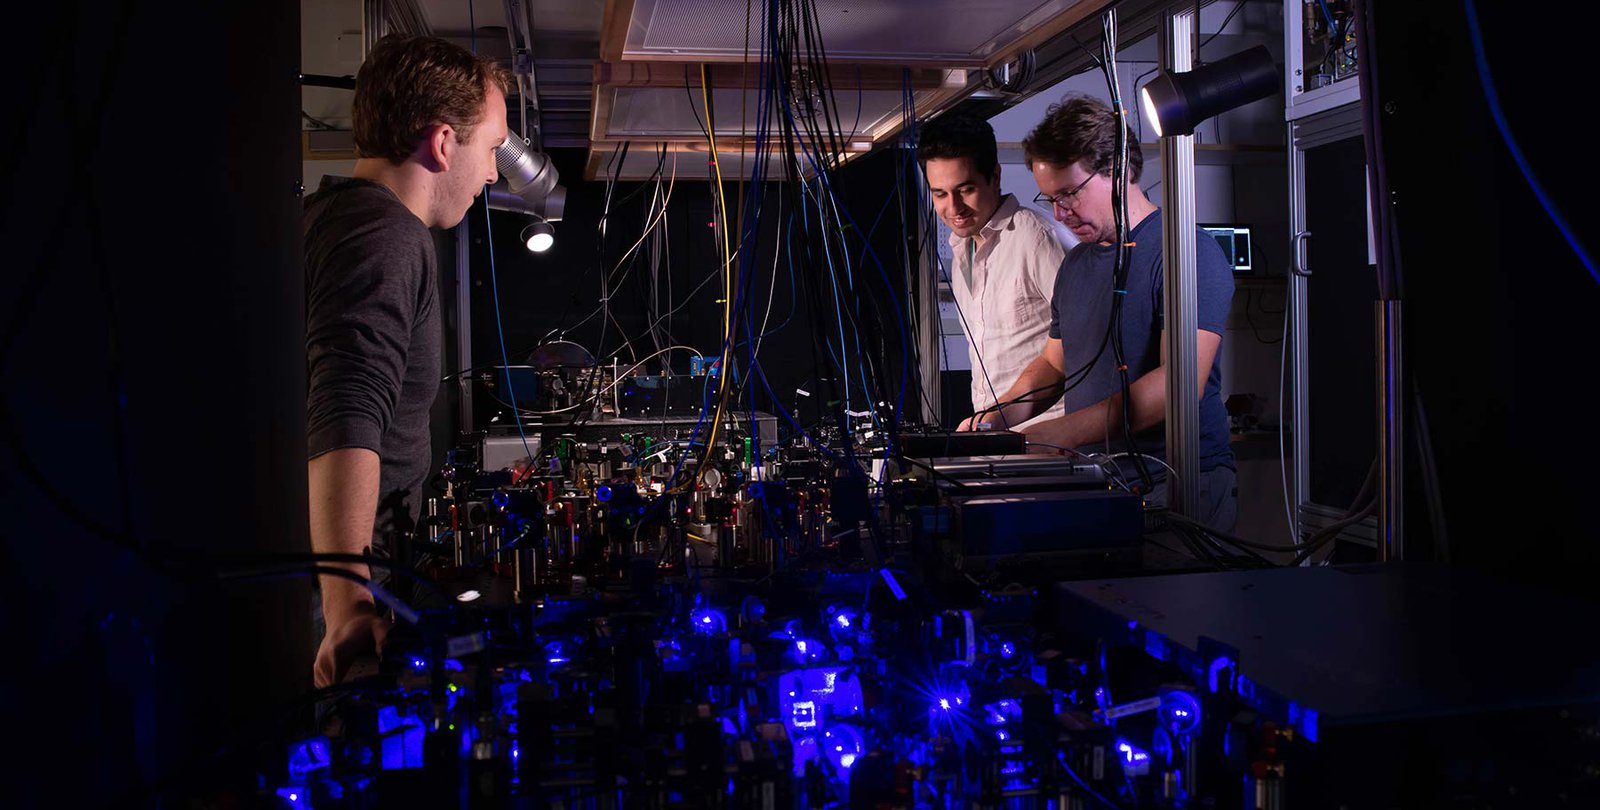 Adam Shaw, Ivaylo Madjarov and Manuel Endres work on their laser-based apparatus at Caltech